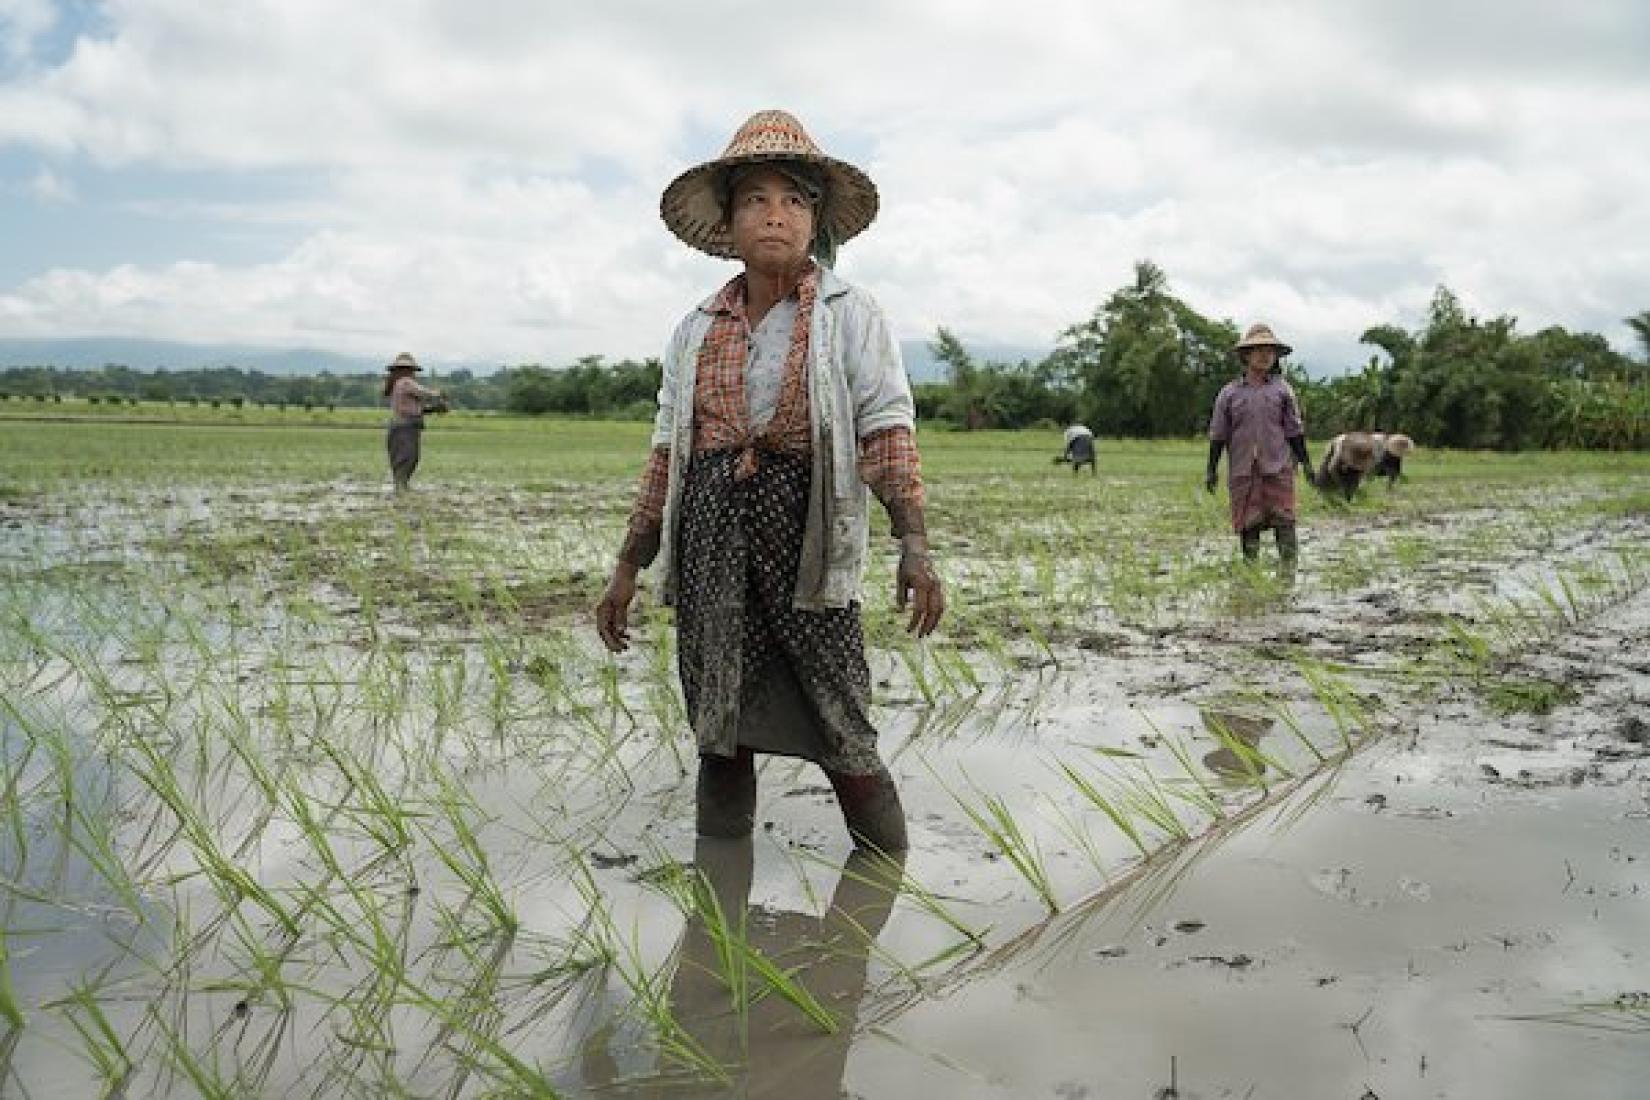 A labourer pauses while manually transplanting rice seedlings in Naypyidaw. Photo: ACIAR/Conor Ashleigh